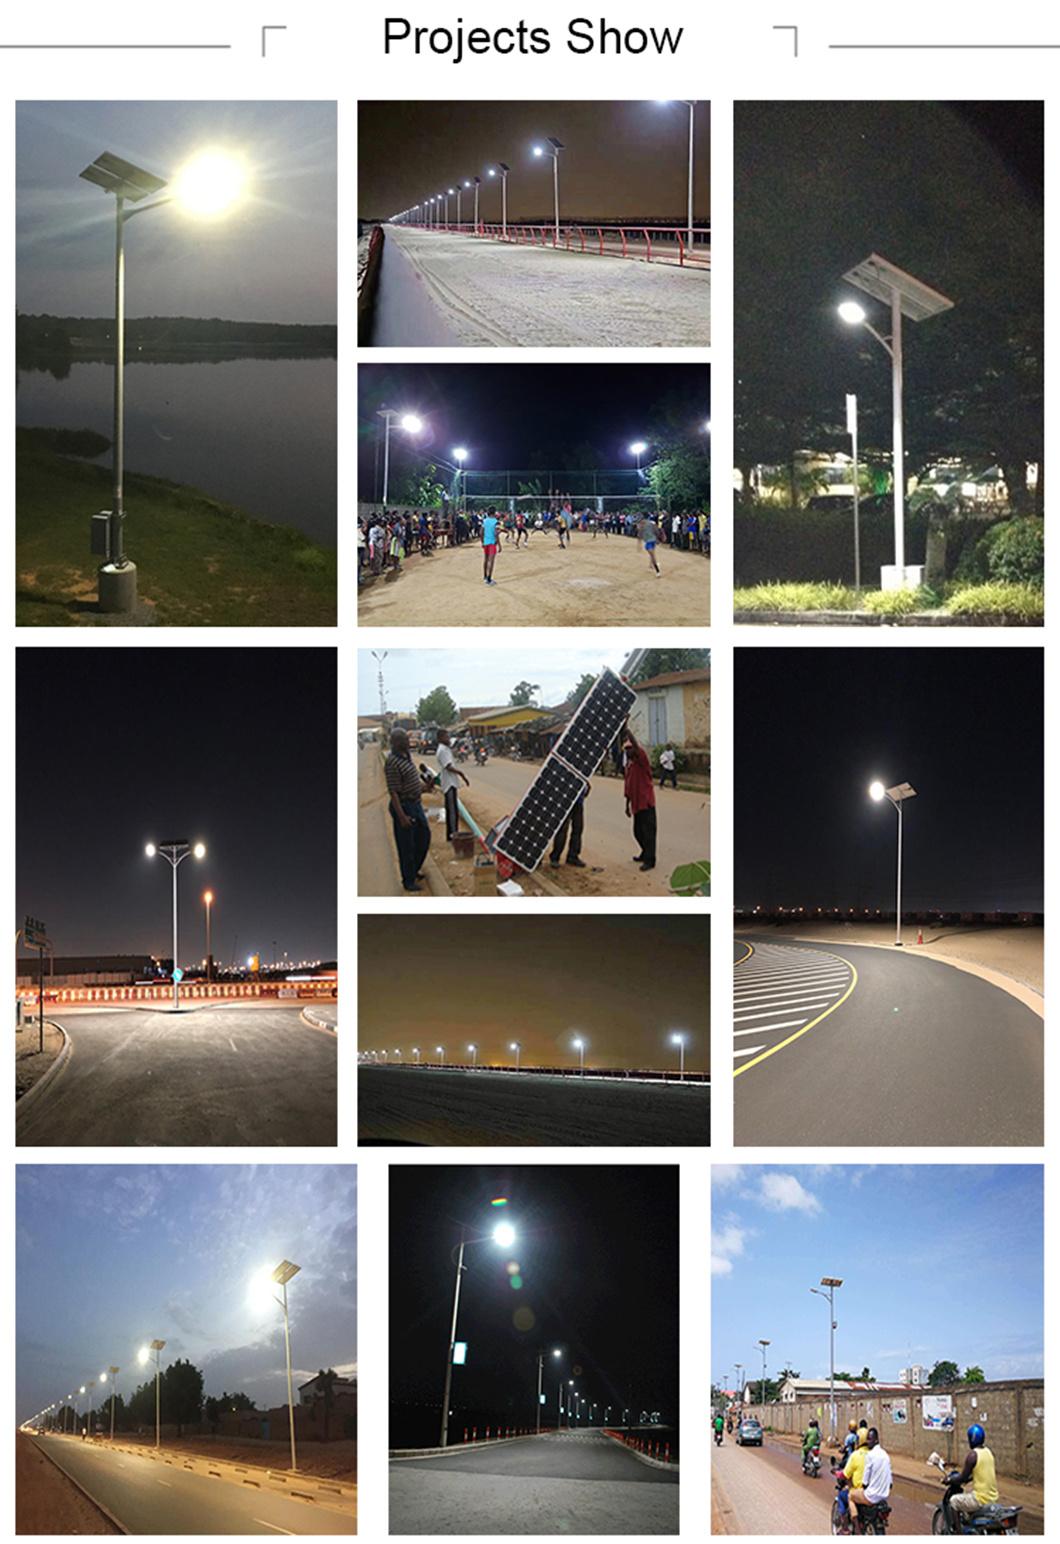 60W Lithium Battery Solar Street Light with Pole Manufacture Factory in China